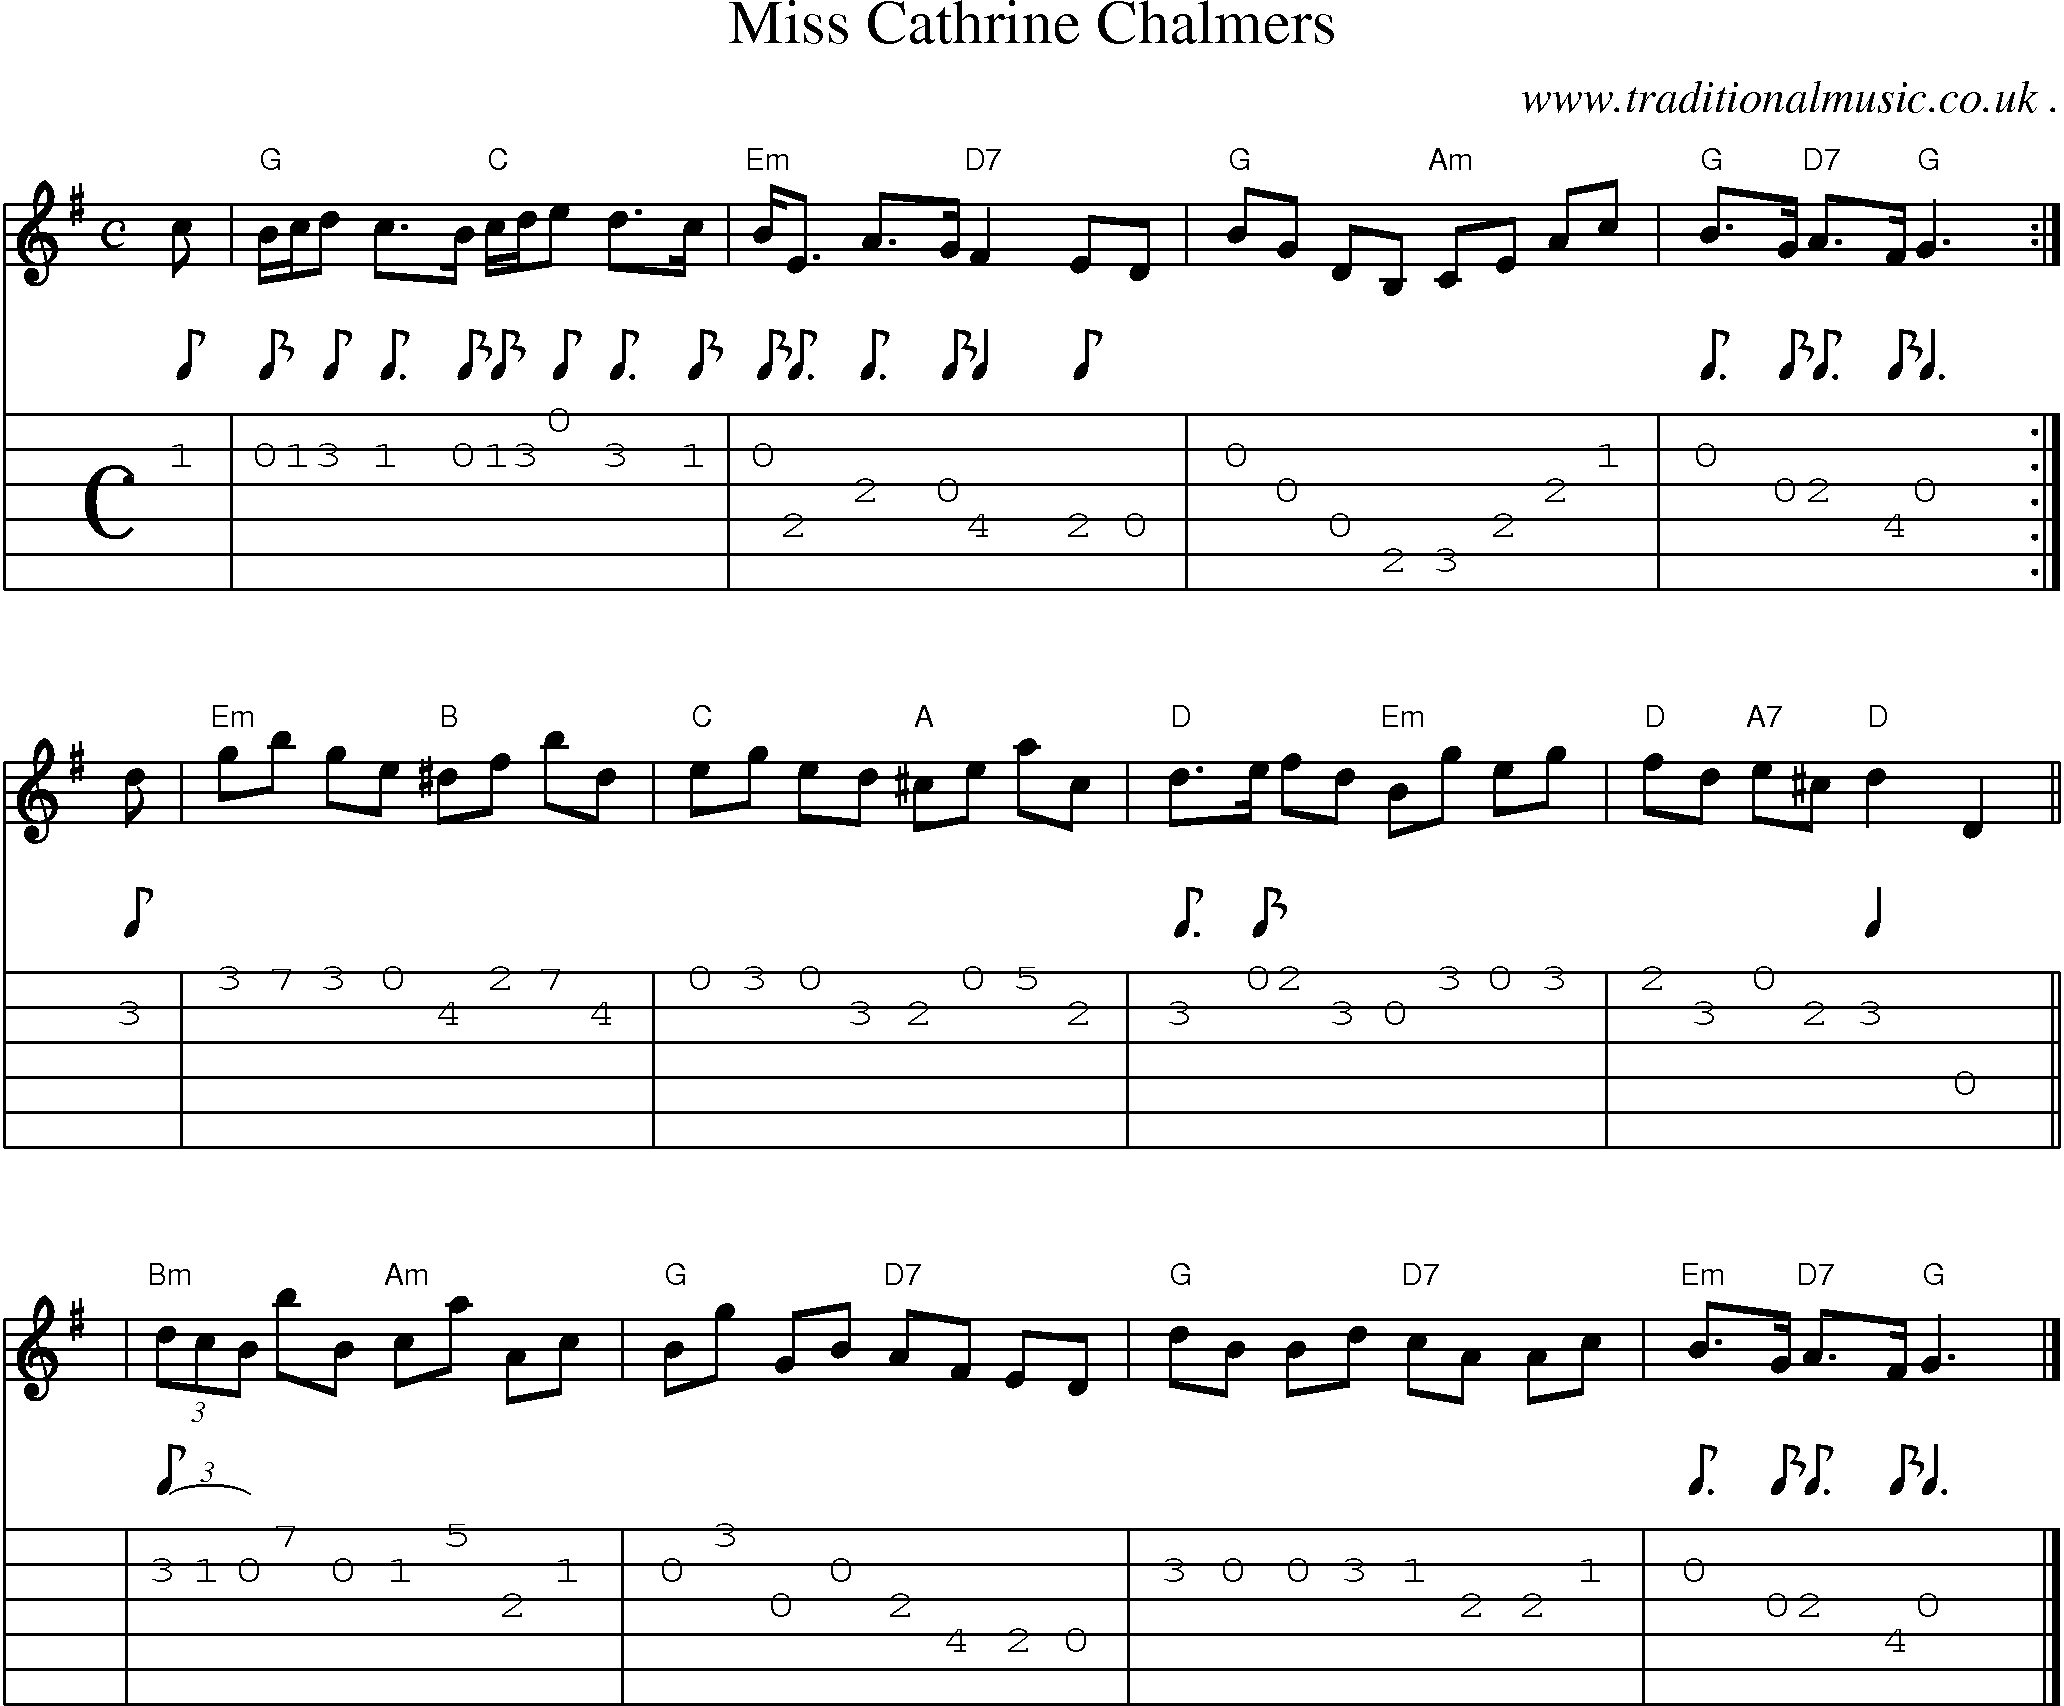 Sheet-music  score, Chords and Guitar Tabs for Miss Cathrine Chalmers